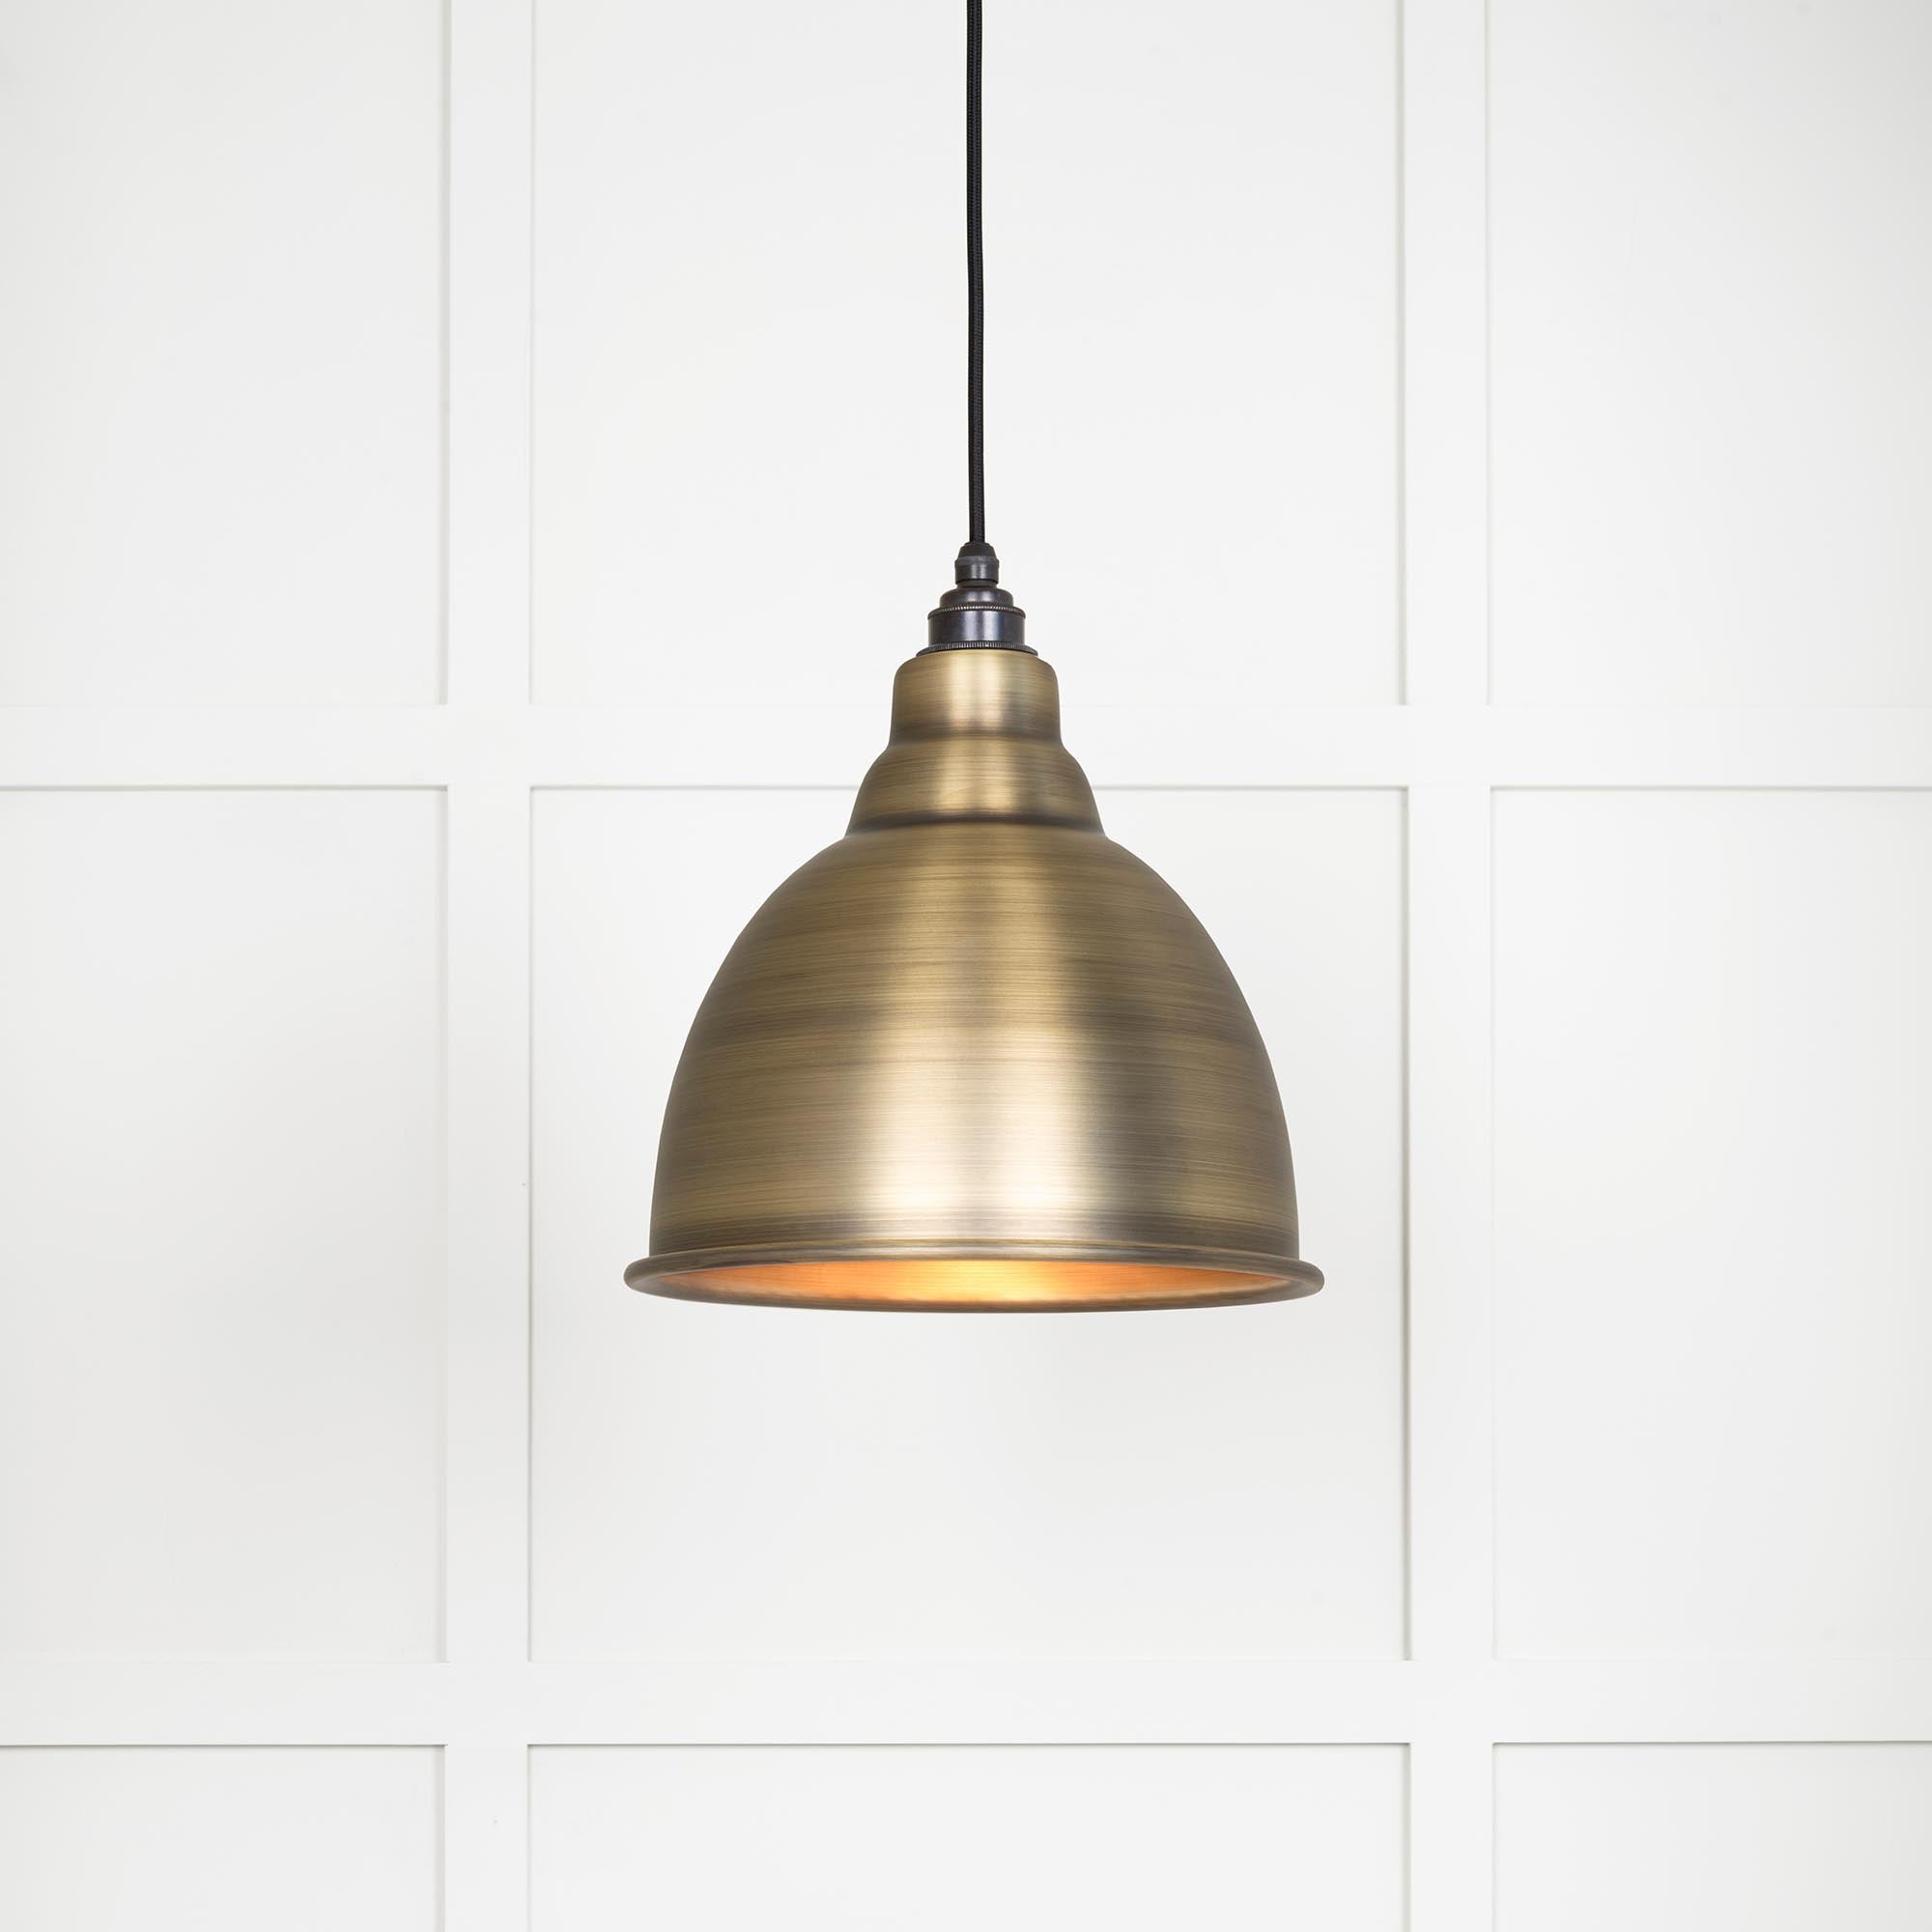 Image of Brindley Ceiling Light in Aged Brass